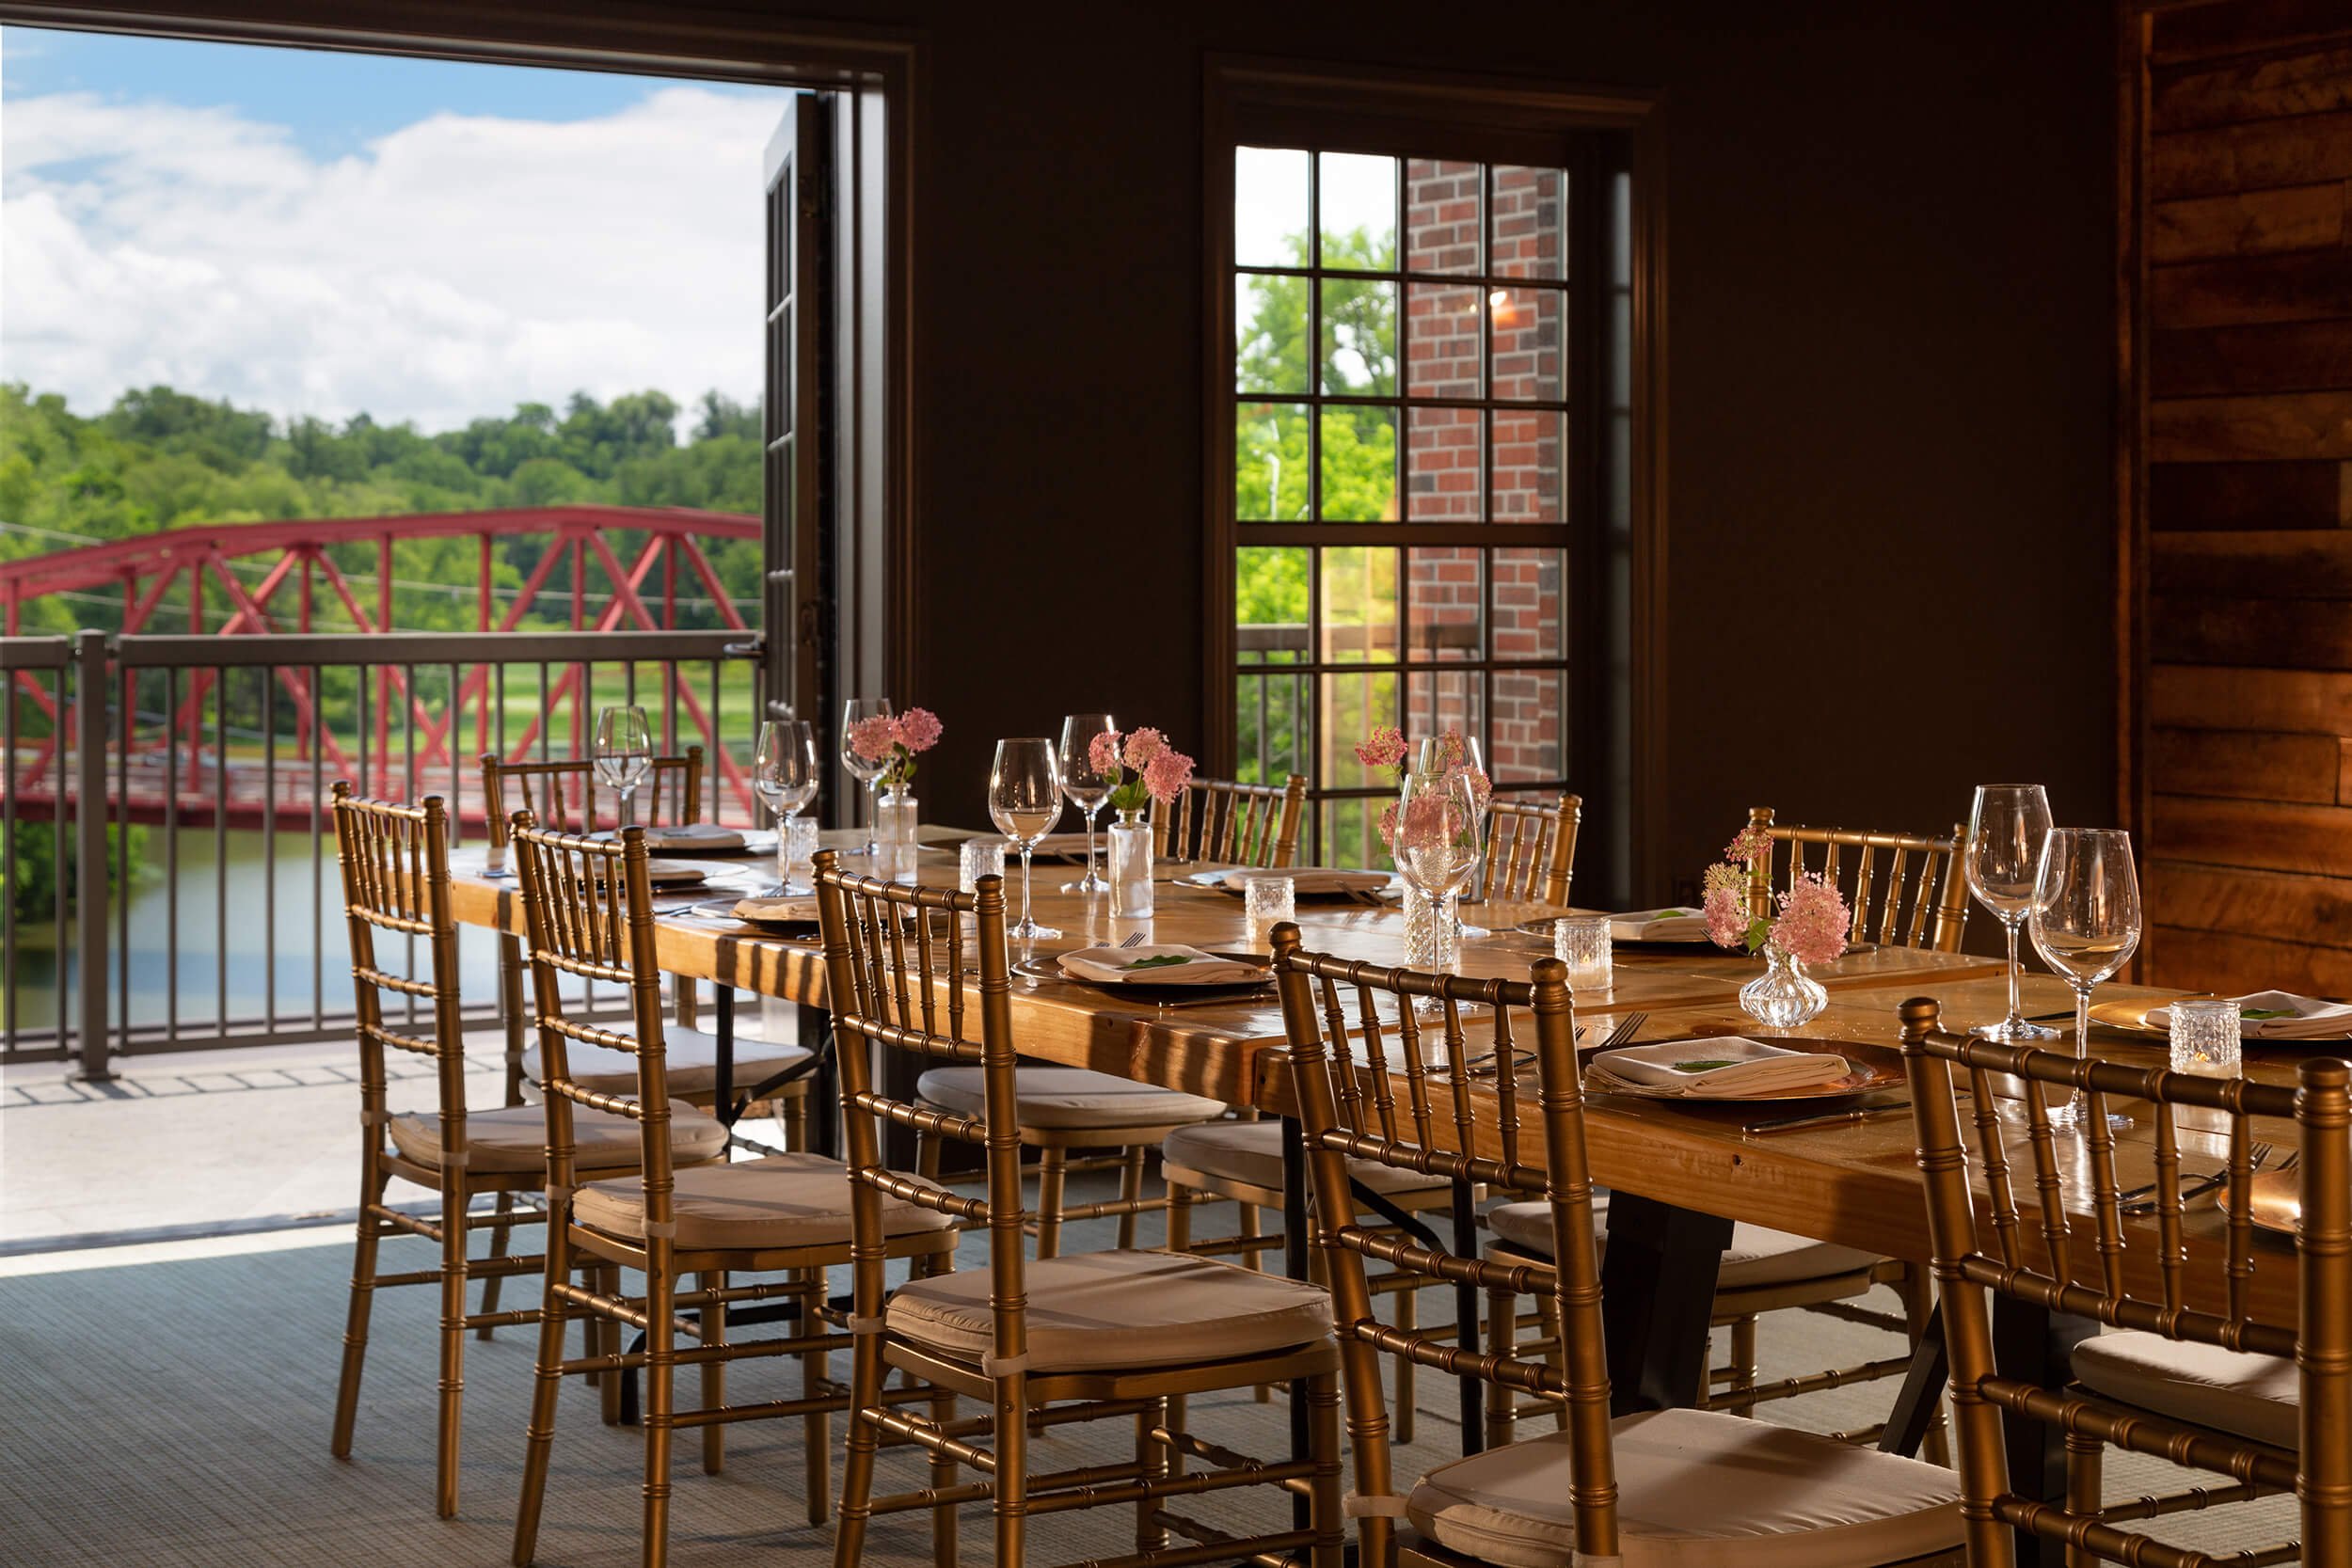 Private dining space in Blackbarn Hudson Valley restaurant at Diamond Mills hotel in Saugerties, NY